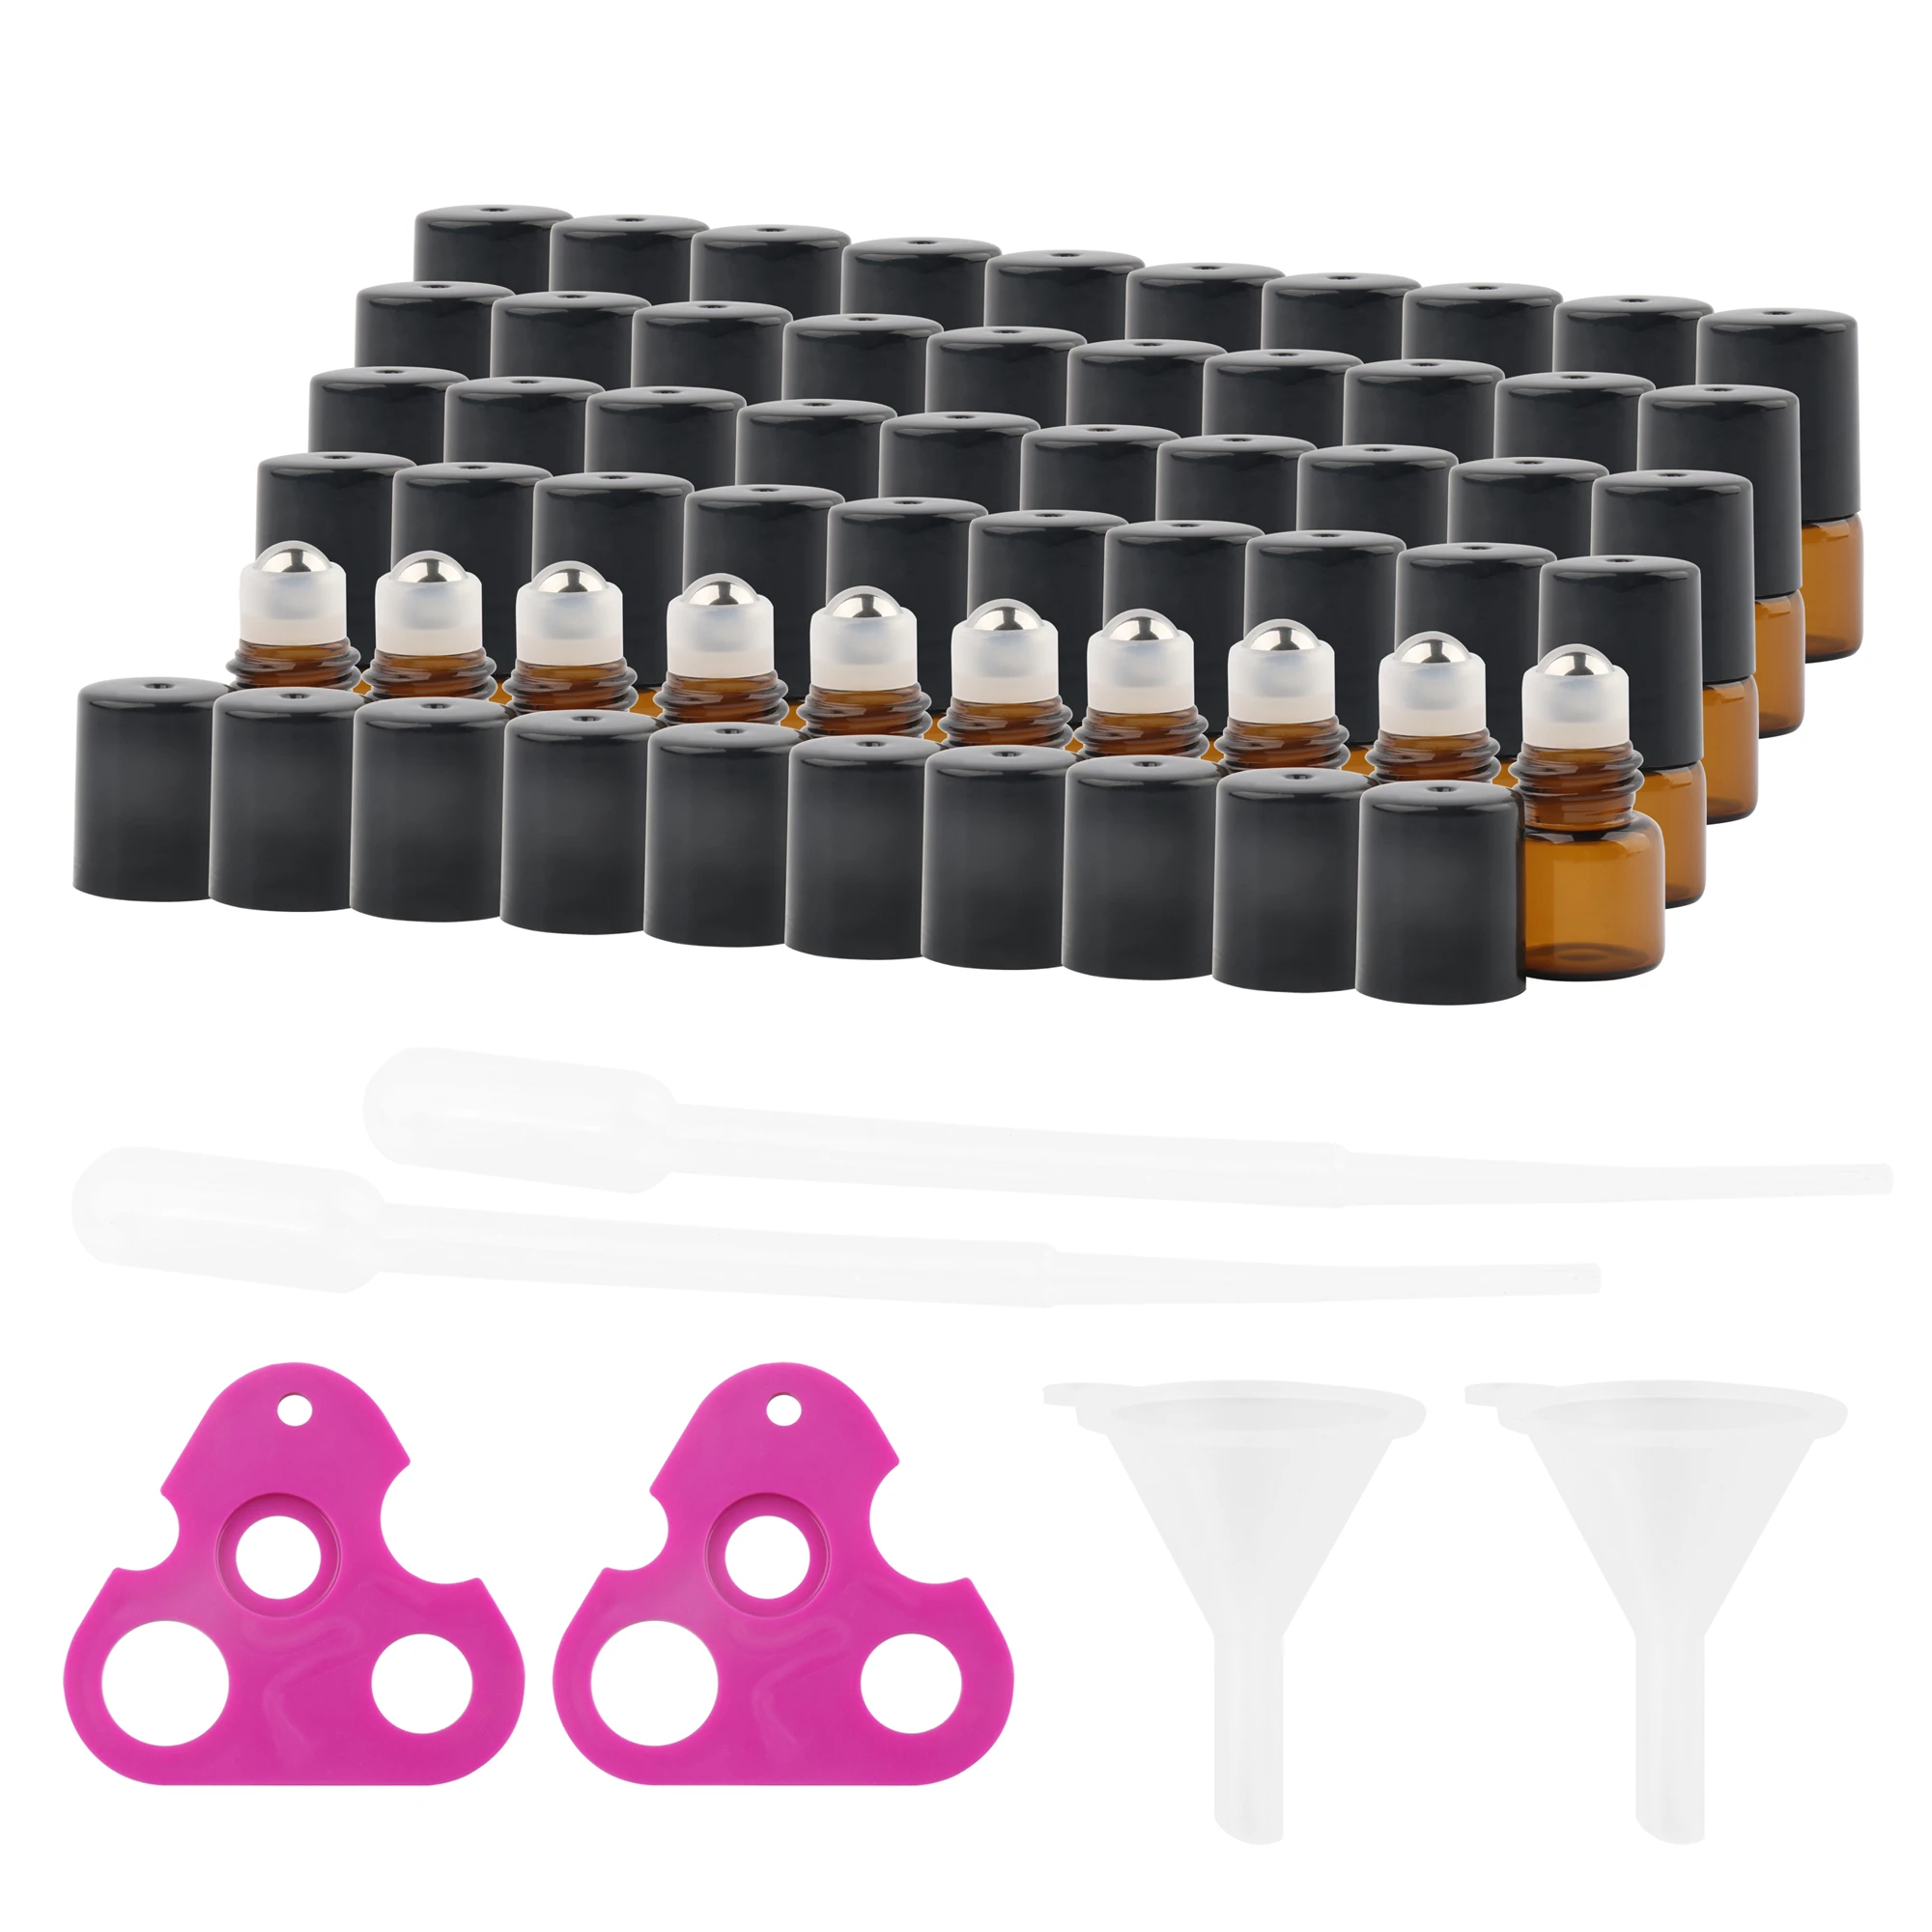 50pc 1ml 2ml 3ml Amber Thin Glass Roll on Bottle Sample Test Essential Oil Vials with Roller Metal Ball Makeup Tools